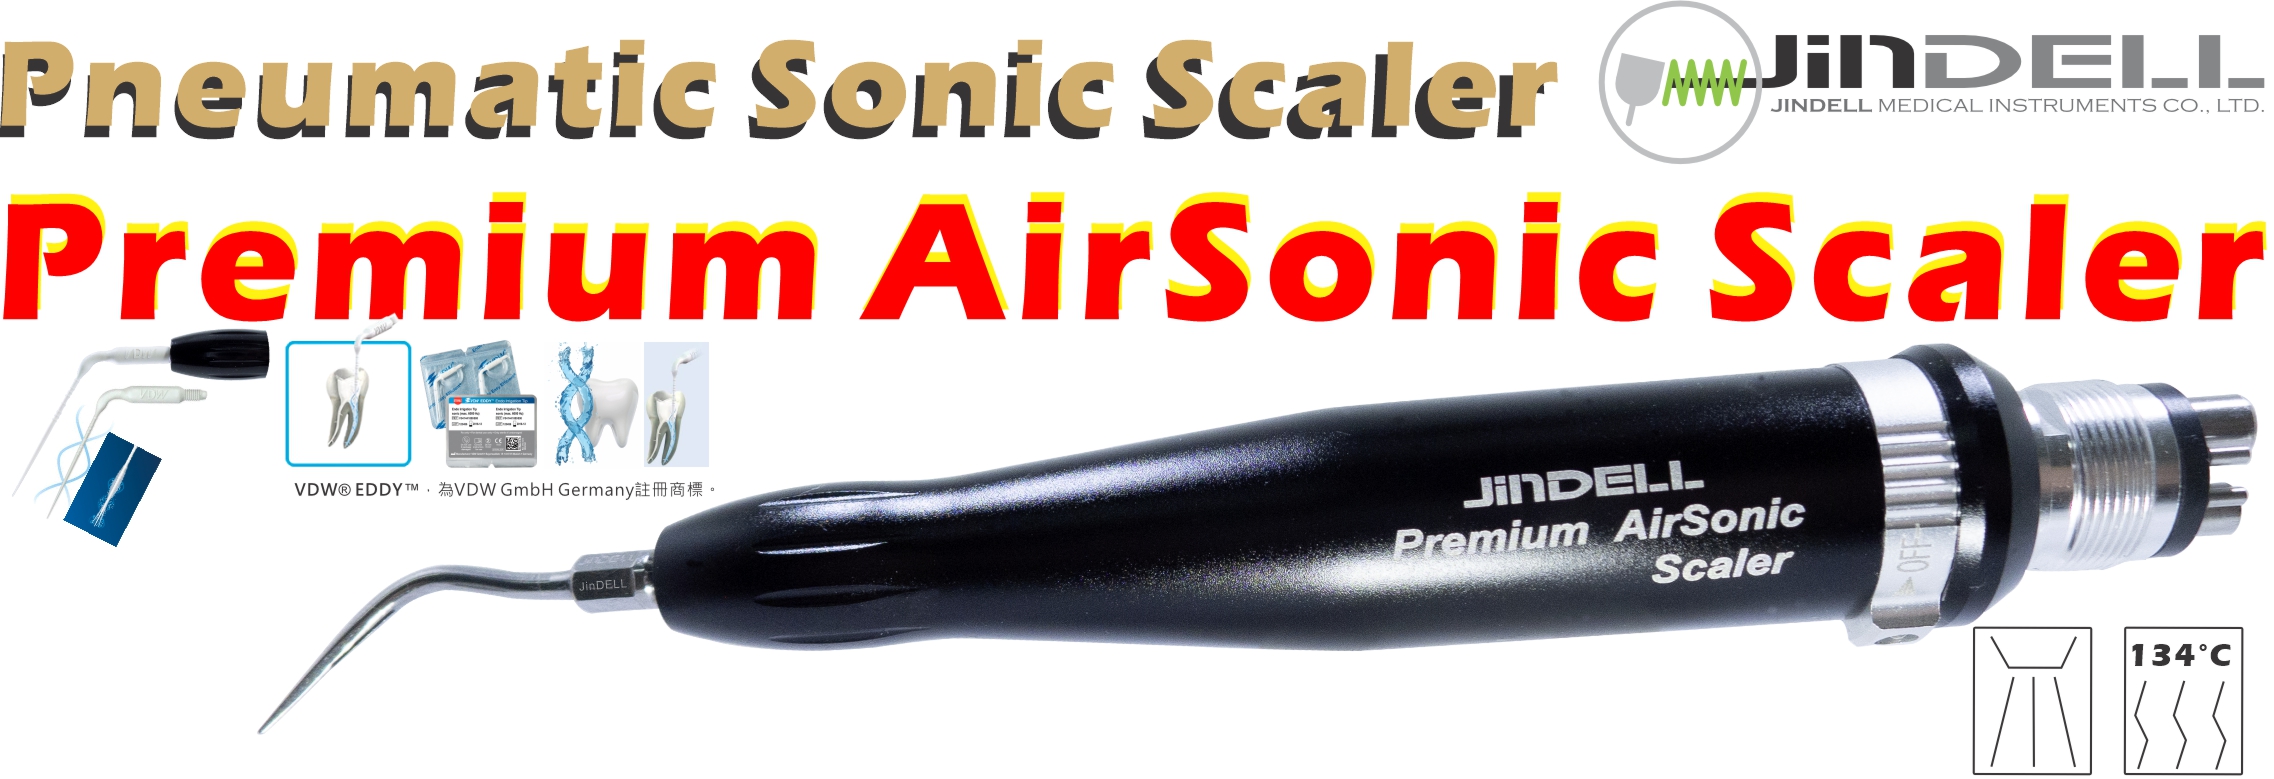 JinDELL air sonic scaler 